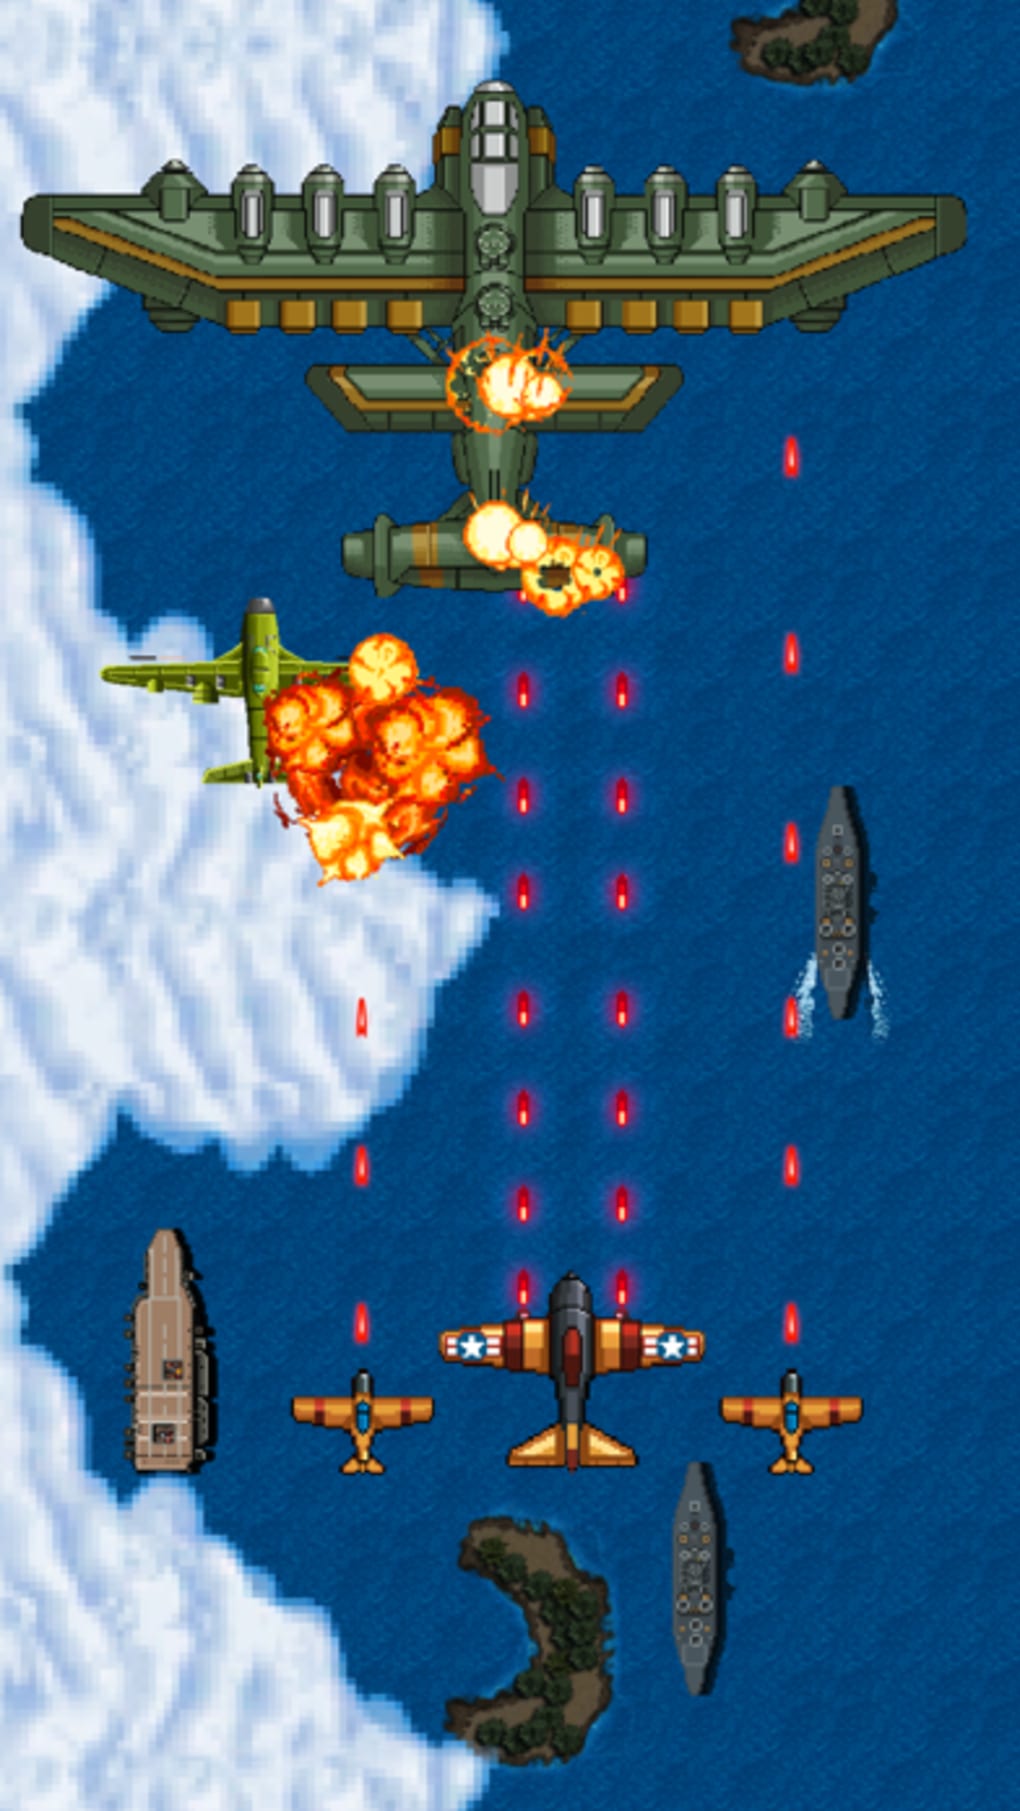 1942 - Classic shooting games - Apps on Google Play